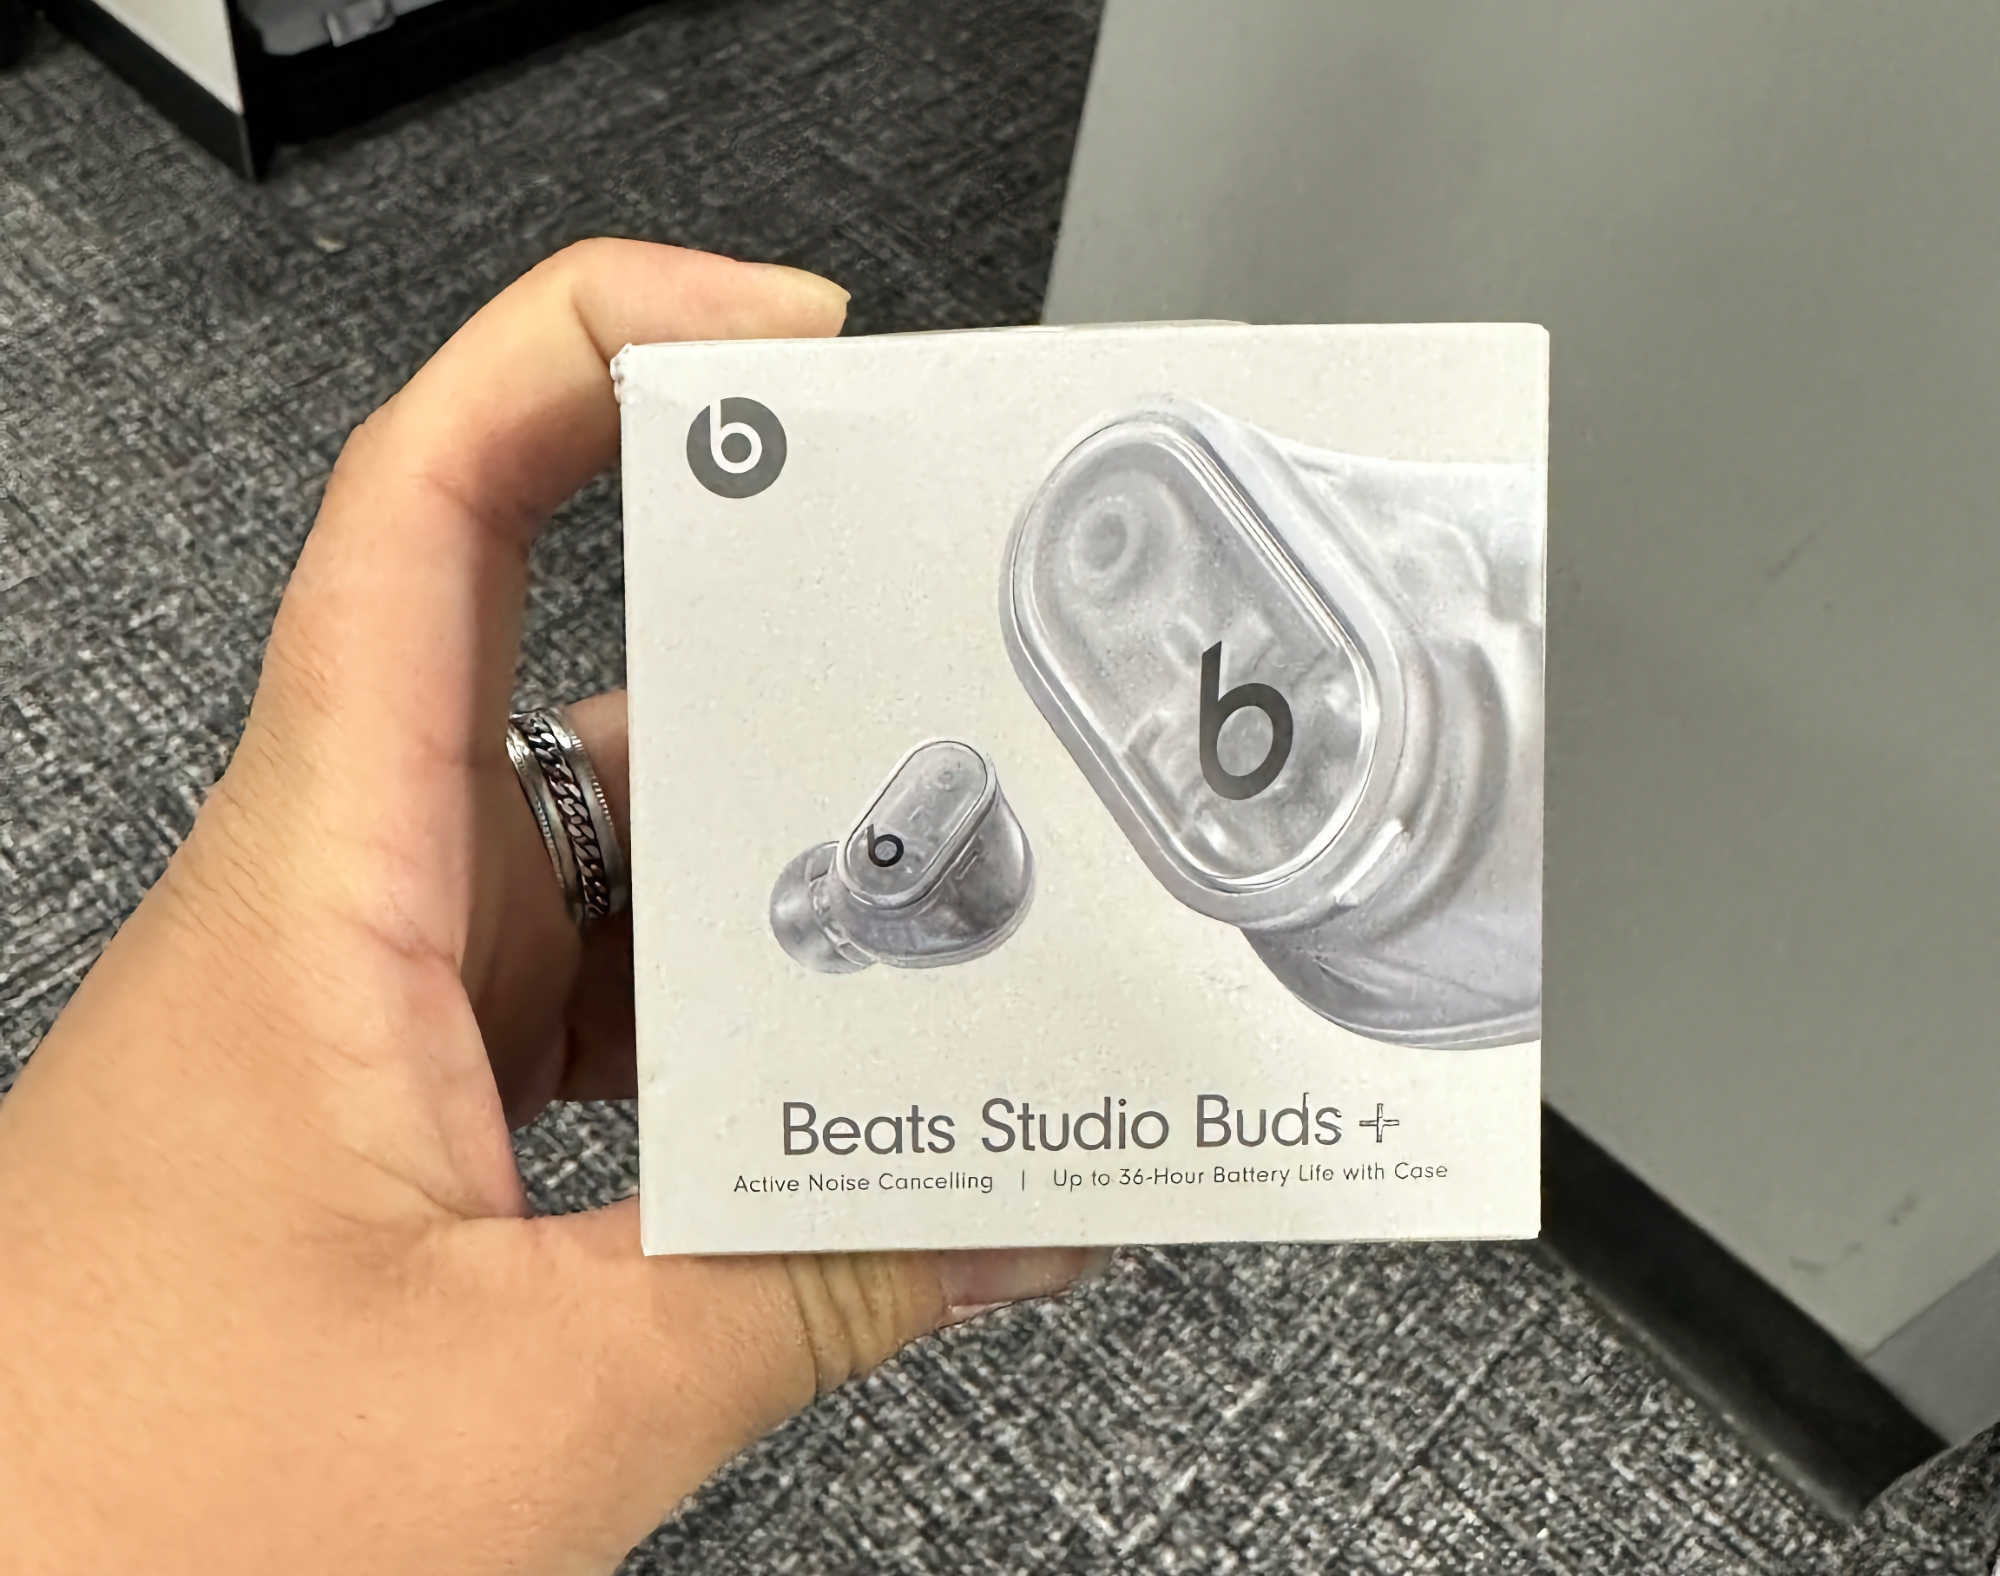 Beats Studio Buds+ spotted at Best Buy: transparent design, improved ANC and up to 36 hours of battery life